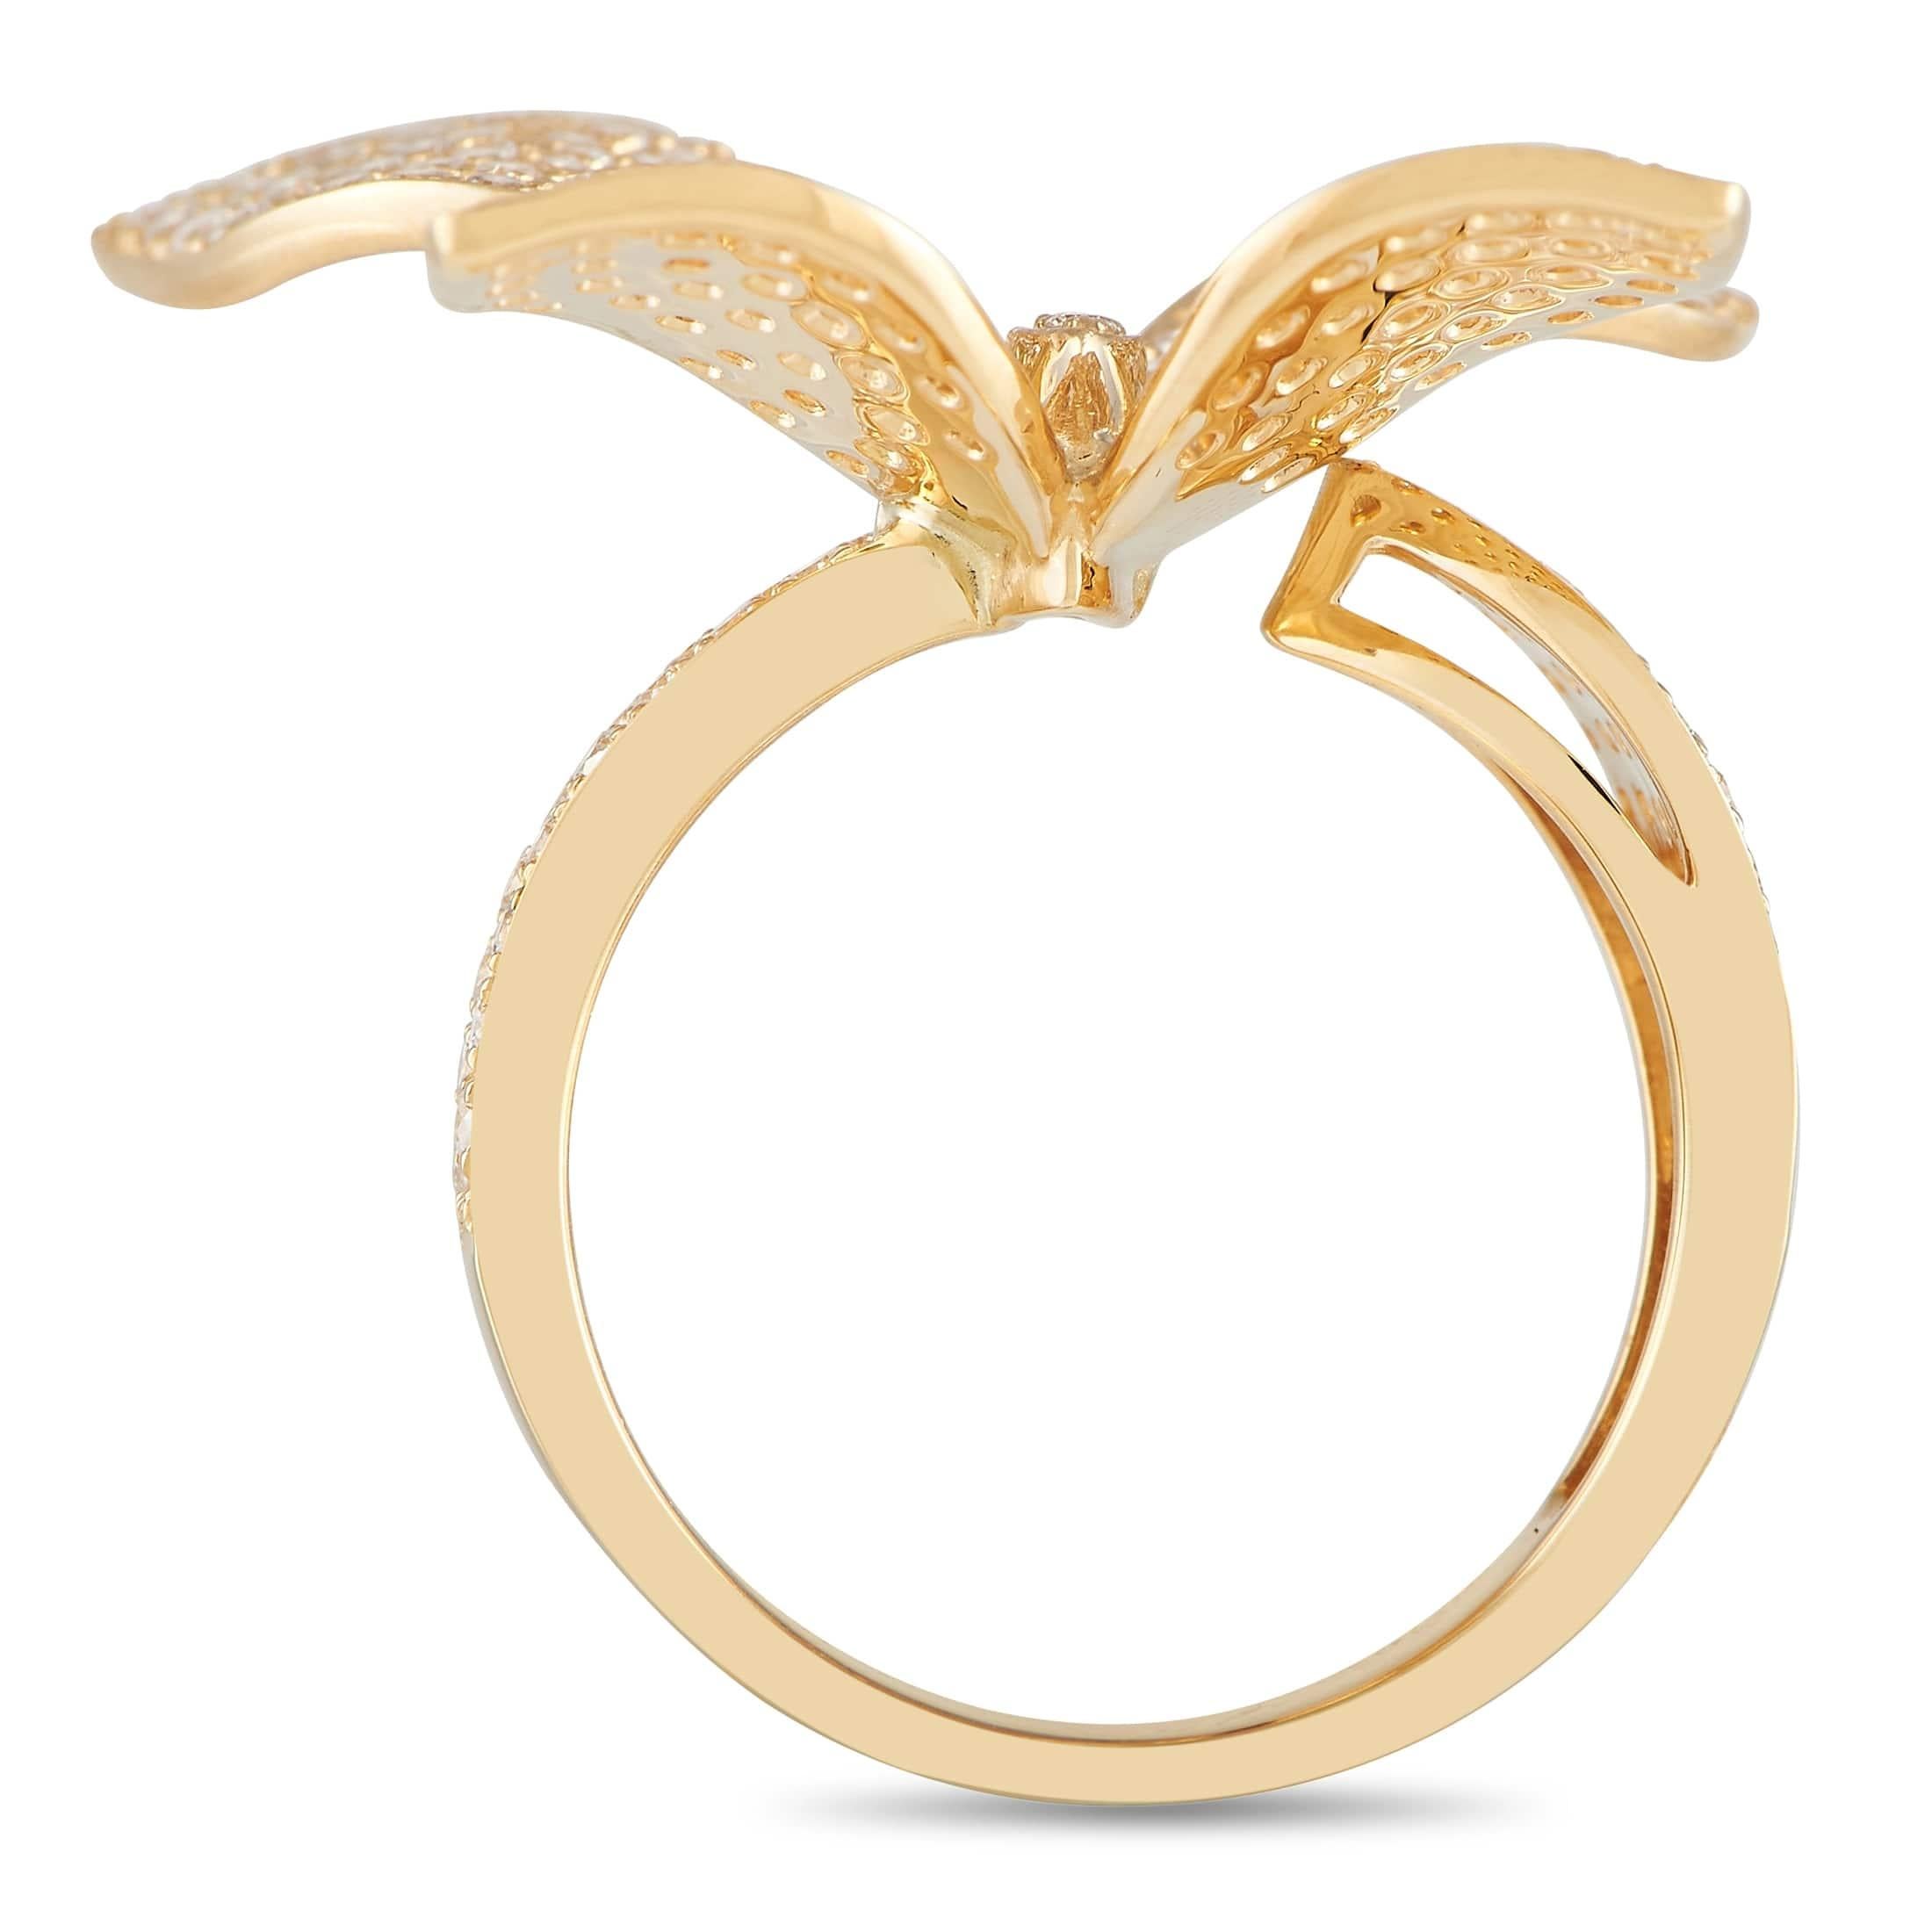 A ring of regal beauty. This 18-karat yellow gold band measures 3mm thick and features an almost open-shank profile. One end of the ring bears an attractive flower-like centerpiece while the other end holds a separate petal. The floral motif is